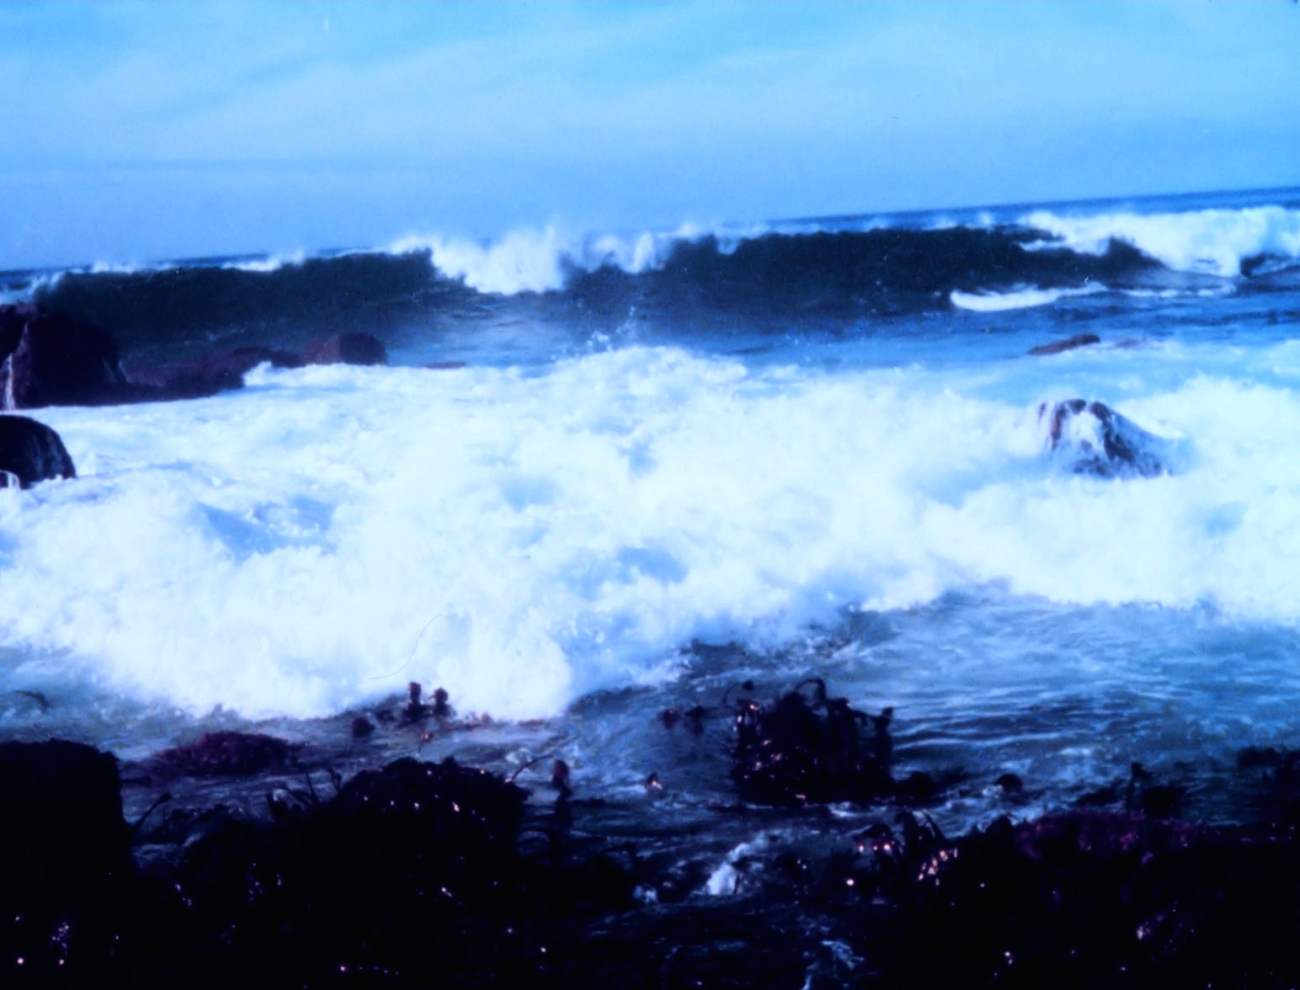 Surf breaking over the rocks and kelpbeds at Point Pinos, Monterey area